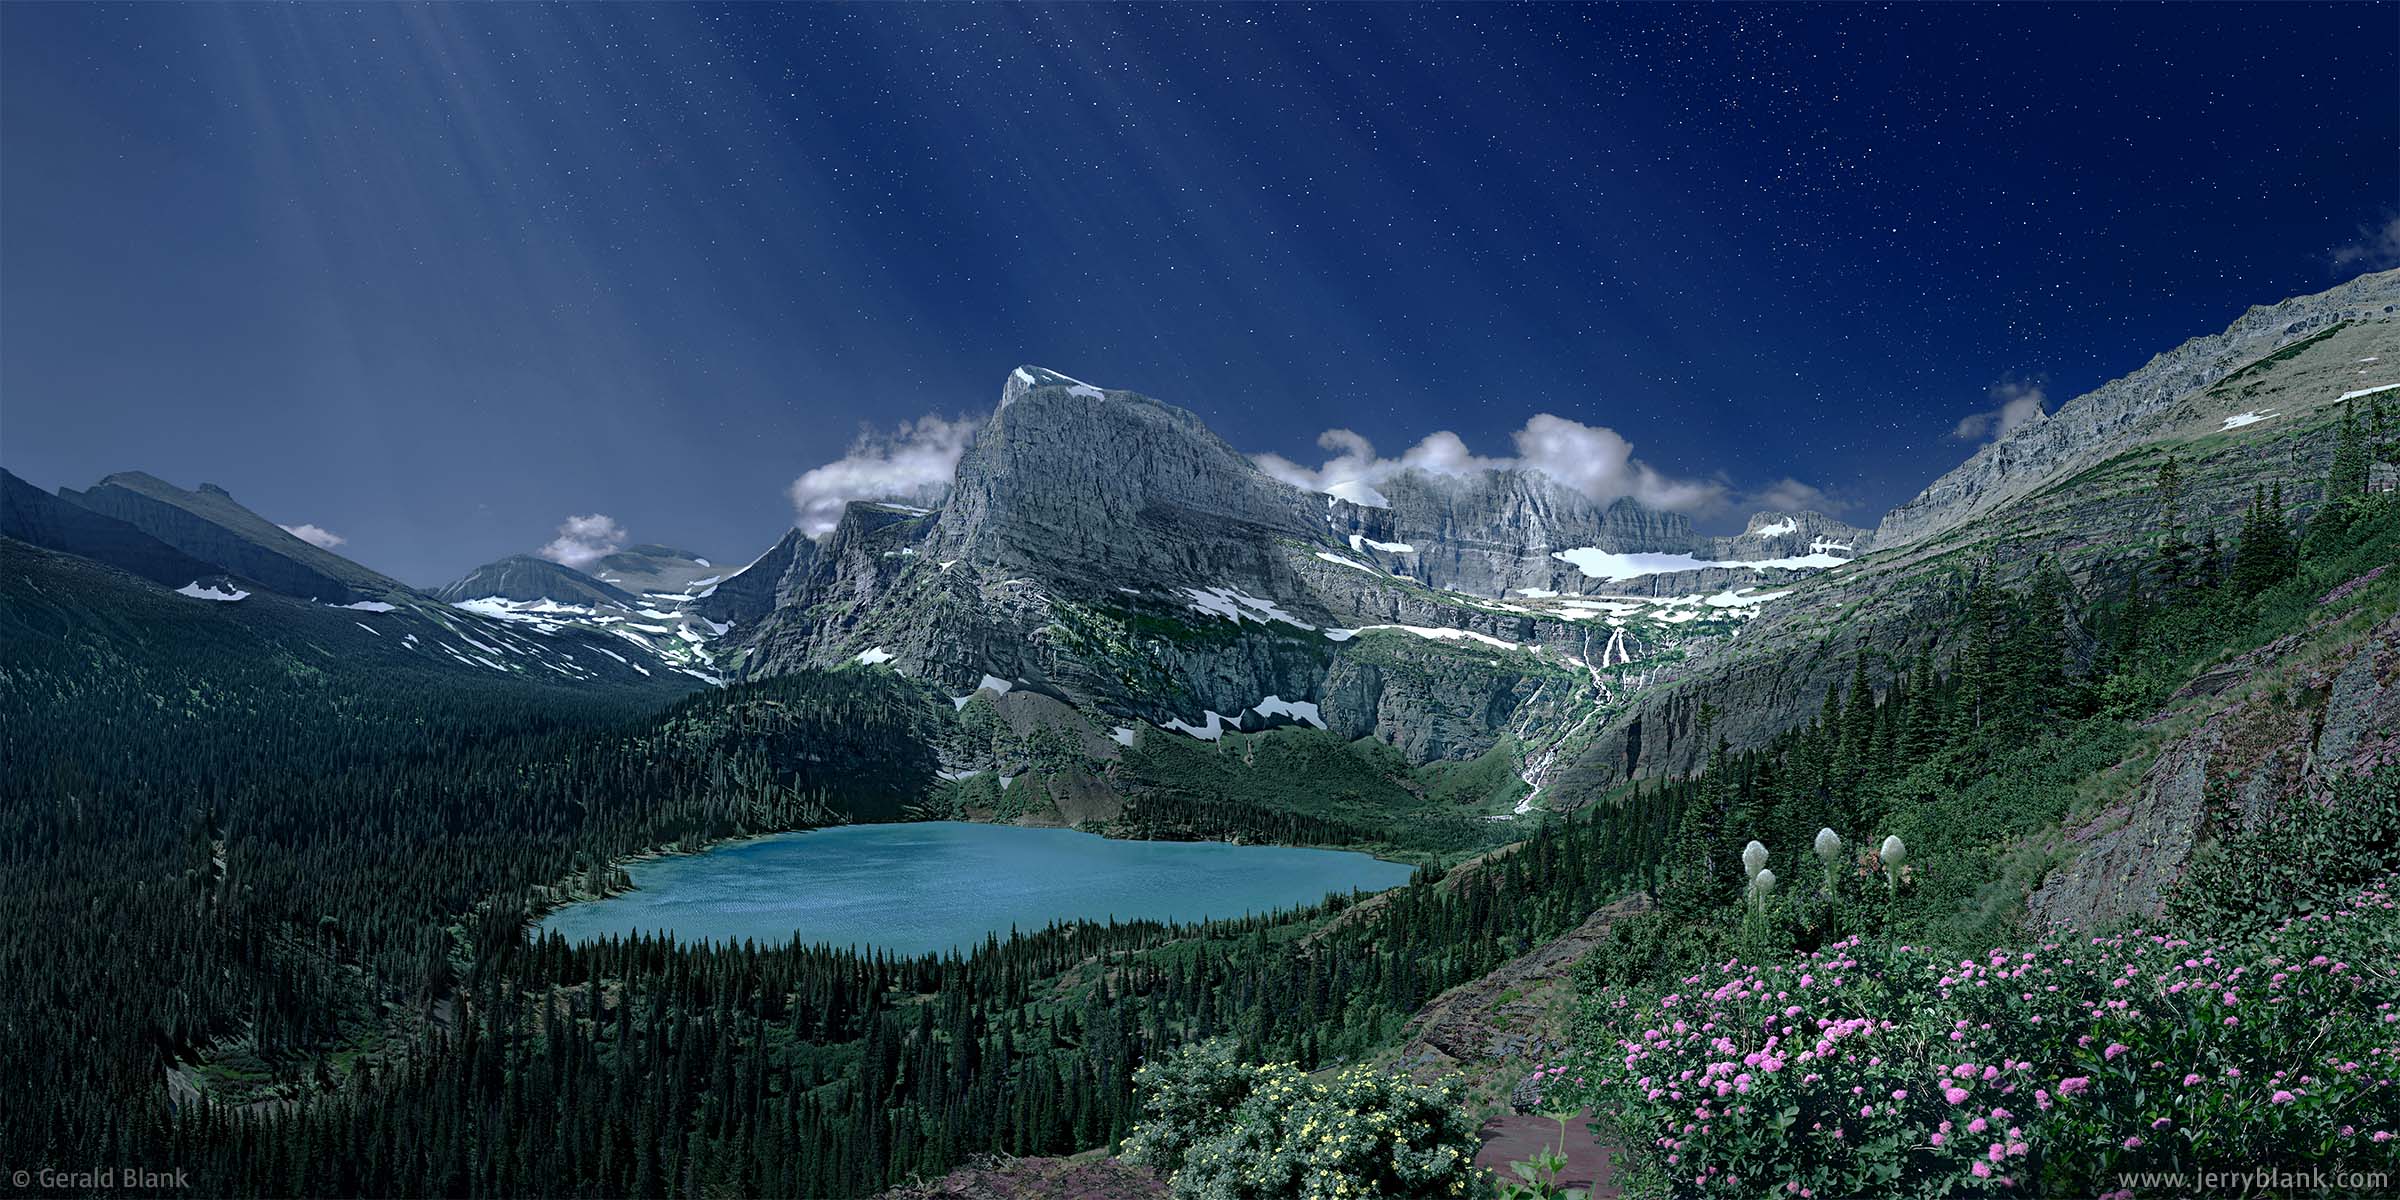 #25019 - A moonlit view looking south toward the Cataract Creek and Grinnell Glacier valleys in Glacier National Park, Montana. Angel Wing and Grinnell Lake are in the center of the photo. - by Jerry Blank